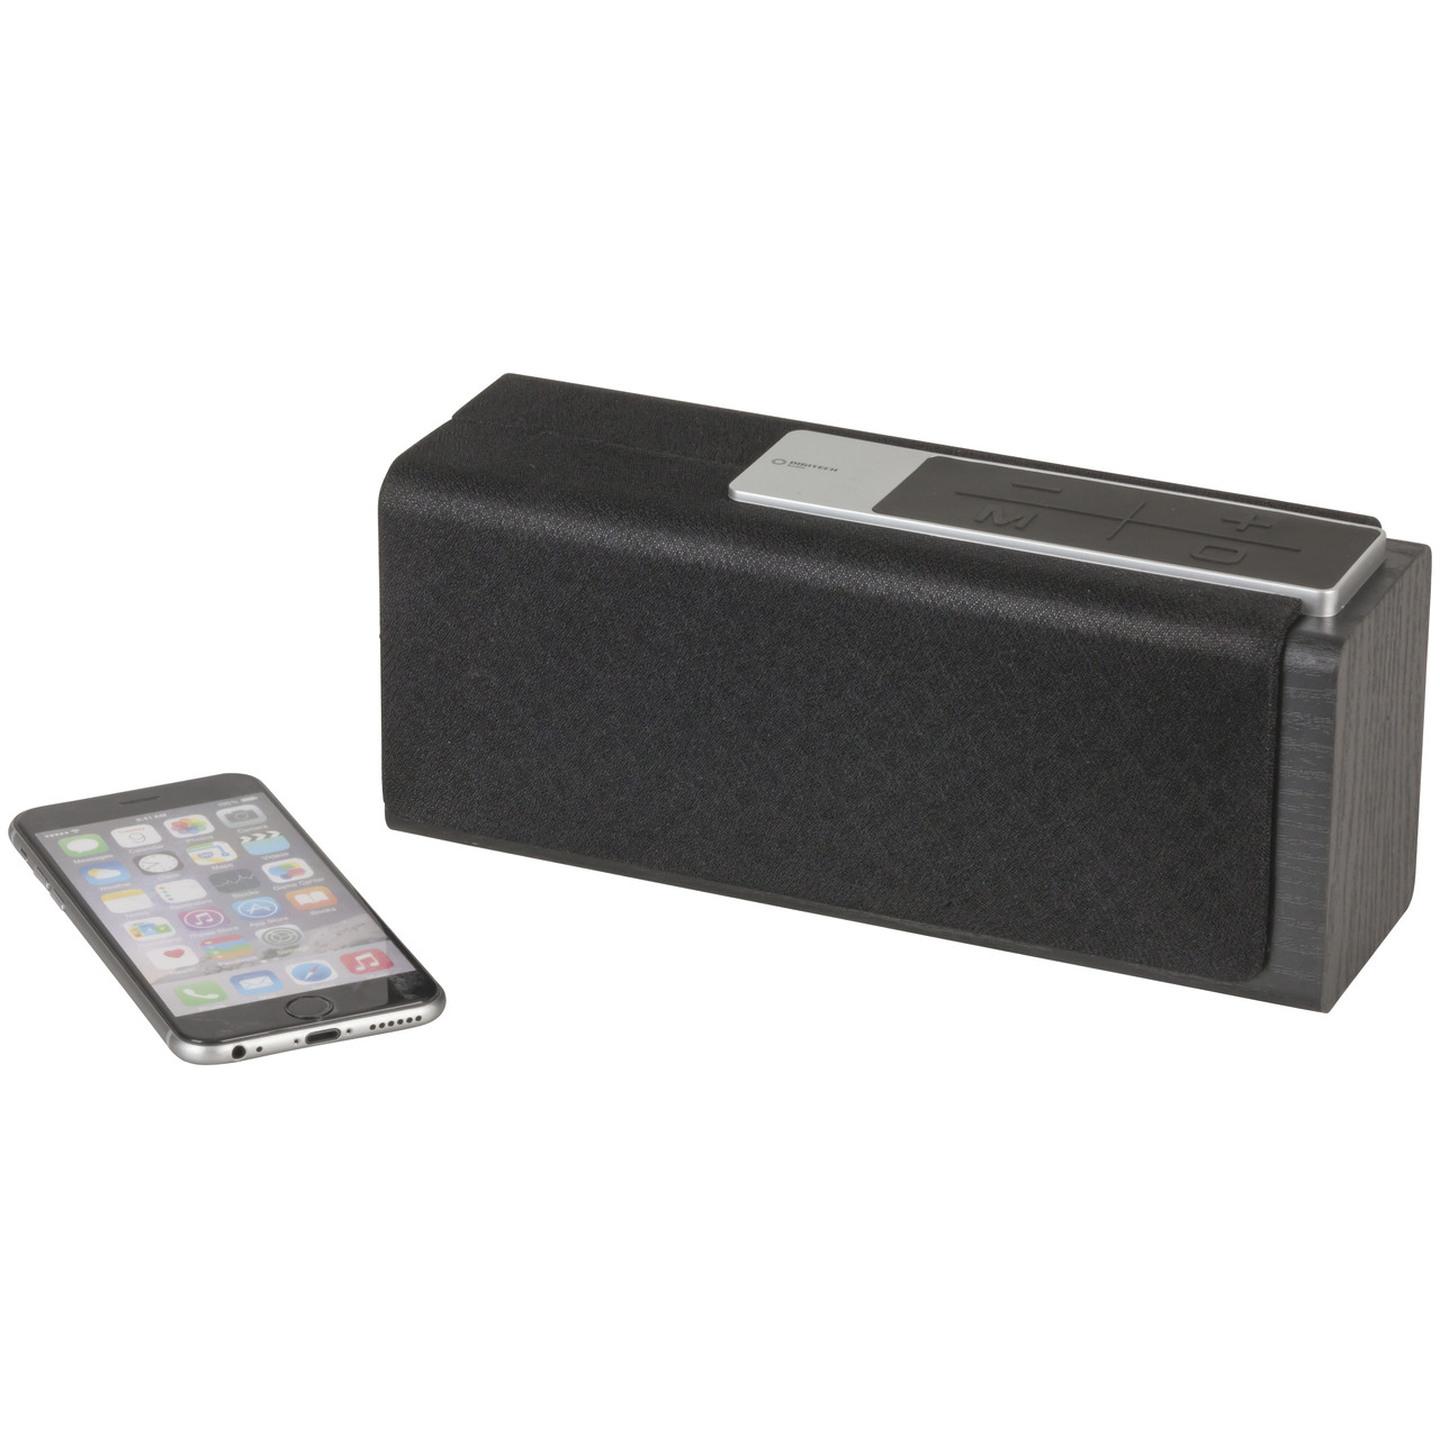 Wi-Fi Rechargeable Speaker with App